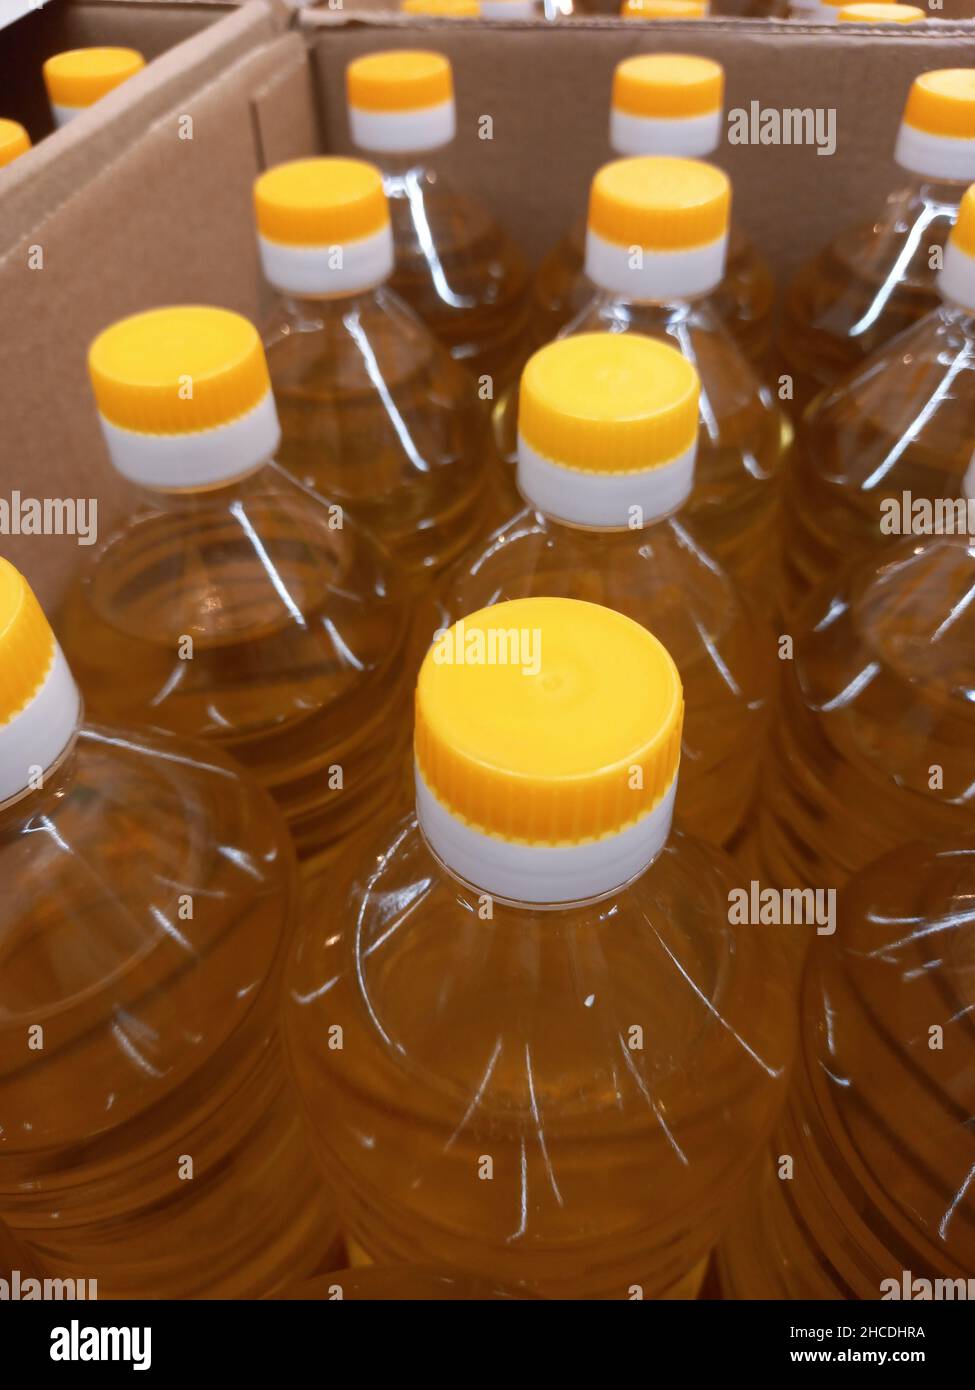 Vegetable oil in plastic bottles in a box. Selling vegetable oil in a market or store. Stock Photo